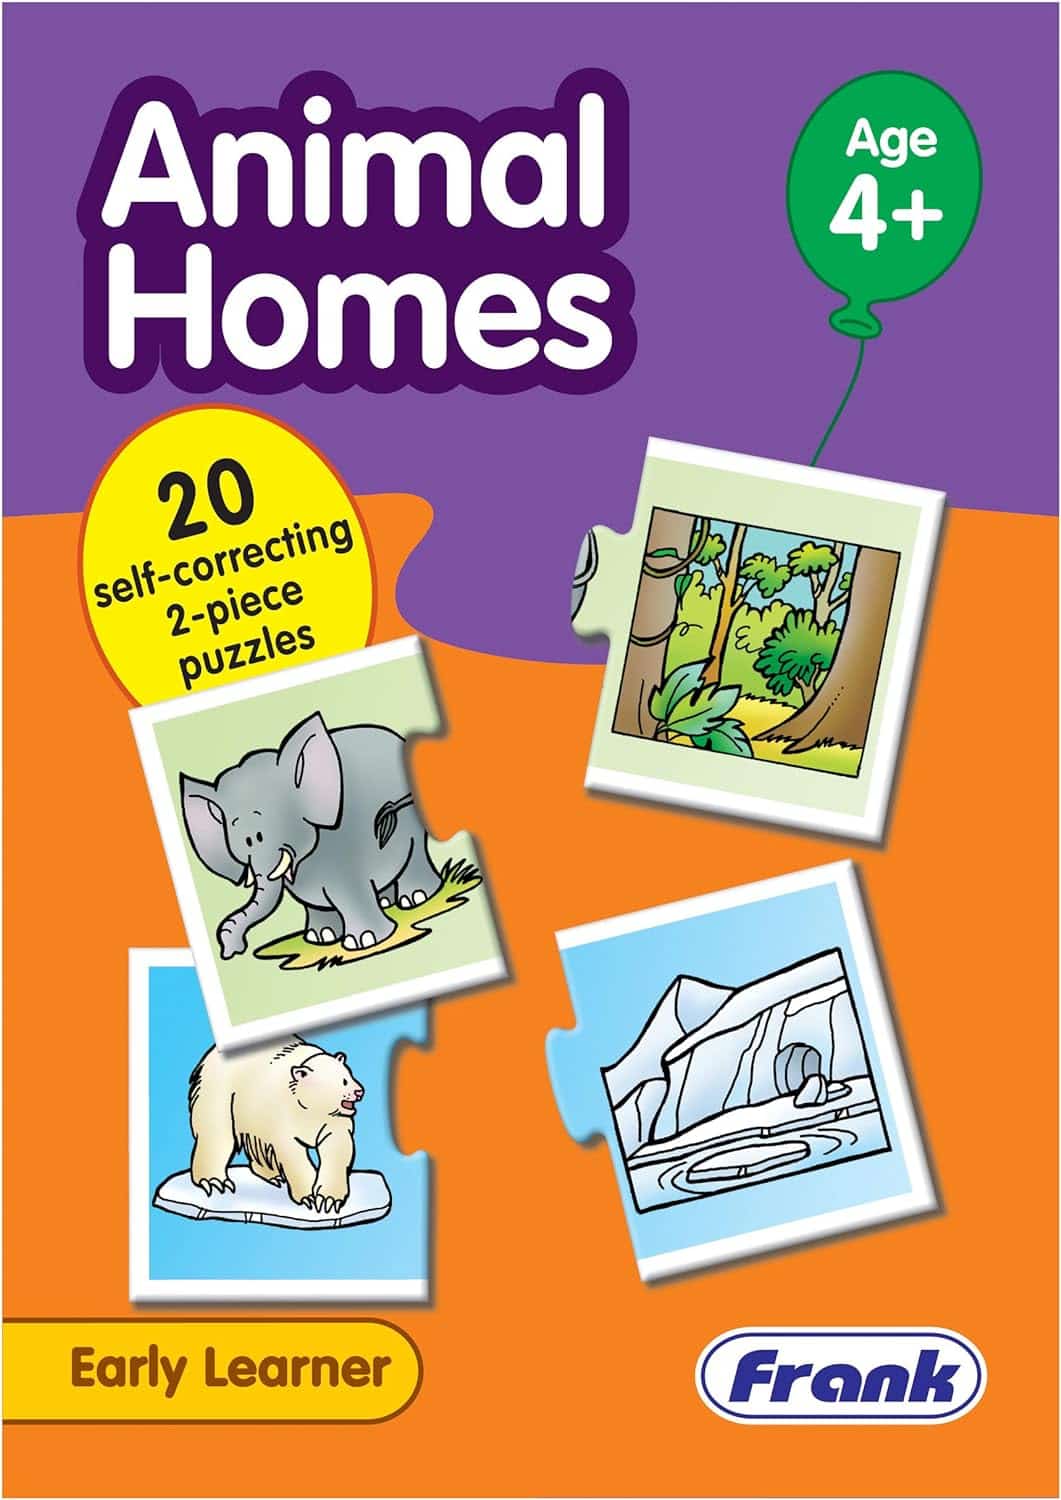 Frank Animal Homes Puzzle – 40 Pieces, 20 Self-Correcting 2-Piece Puzzles, Early Learner Educational Jigsaw Puzzle Pair Set with Images | Ages 4 & Above | Educational Toys and Games